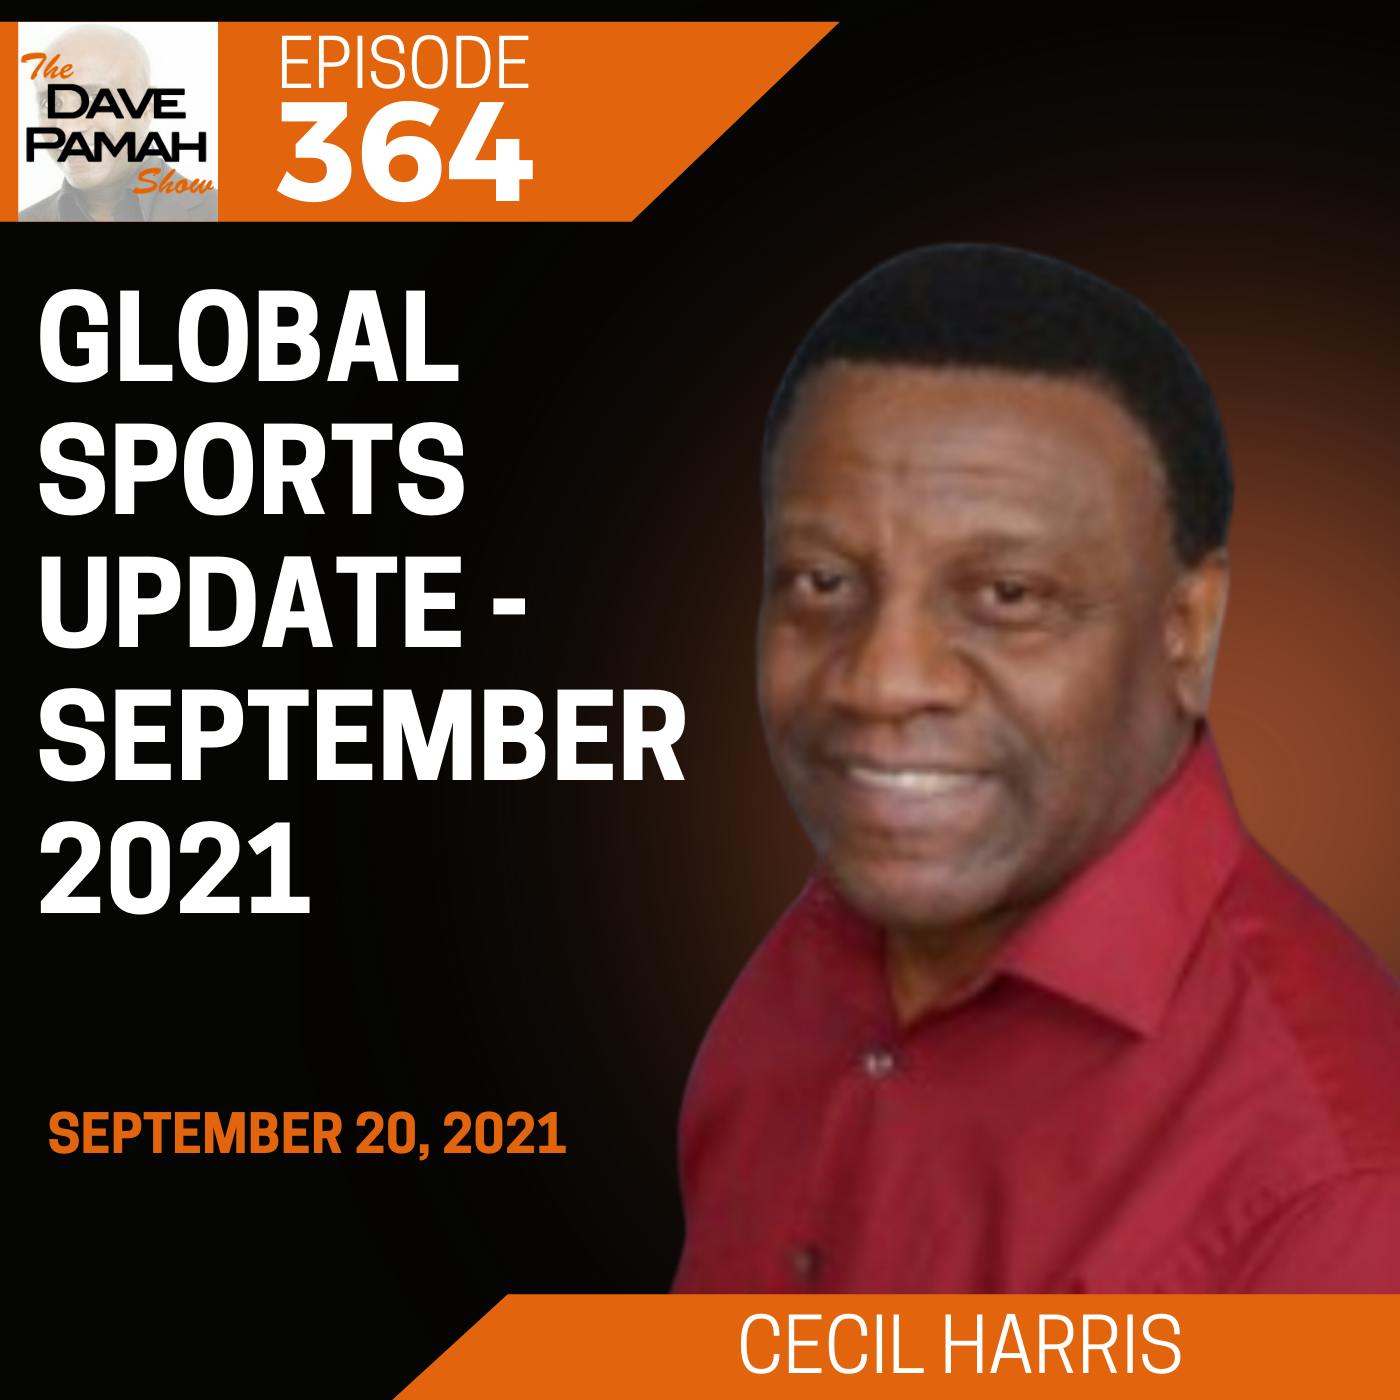 Global Sports Update - September 2021 with Cecil Harris